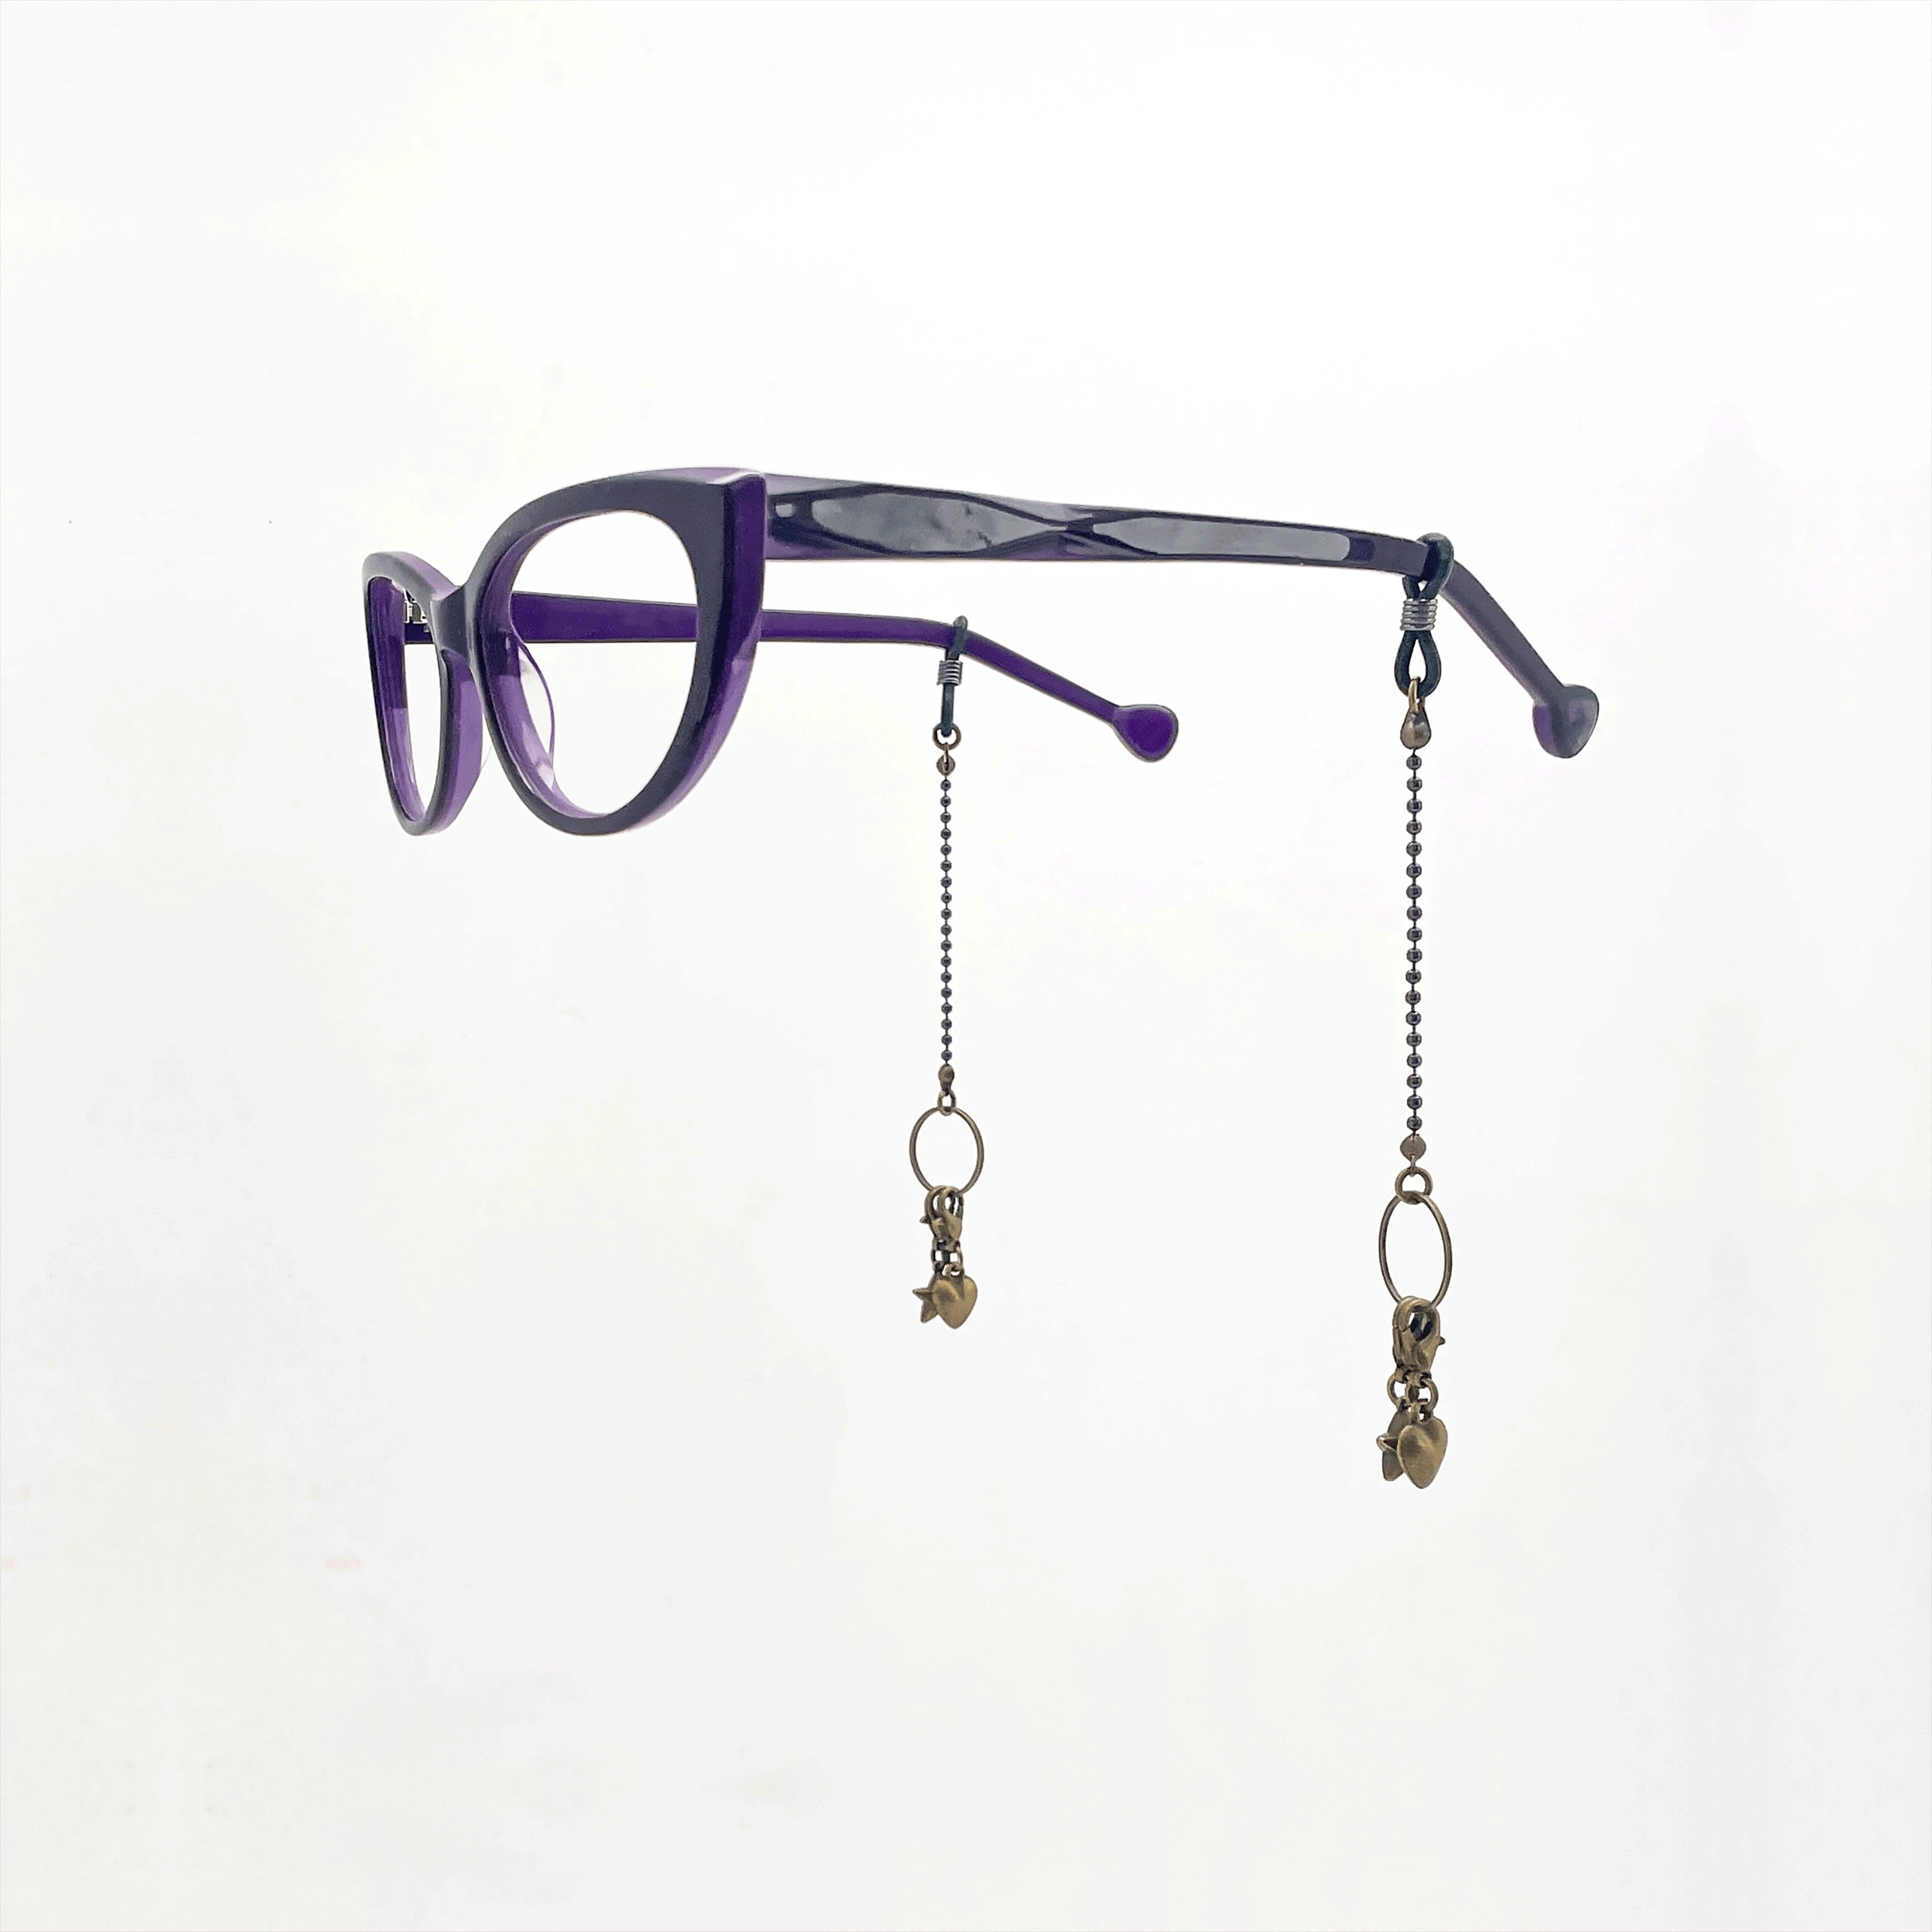 Add Some Charm to Your Eyewear: Explore Our Stylish Glasses Chains with  Charms Collection - Hoya Vision